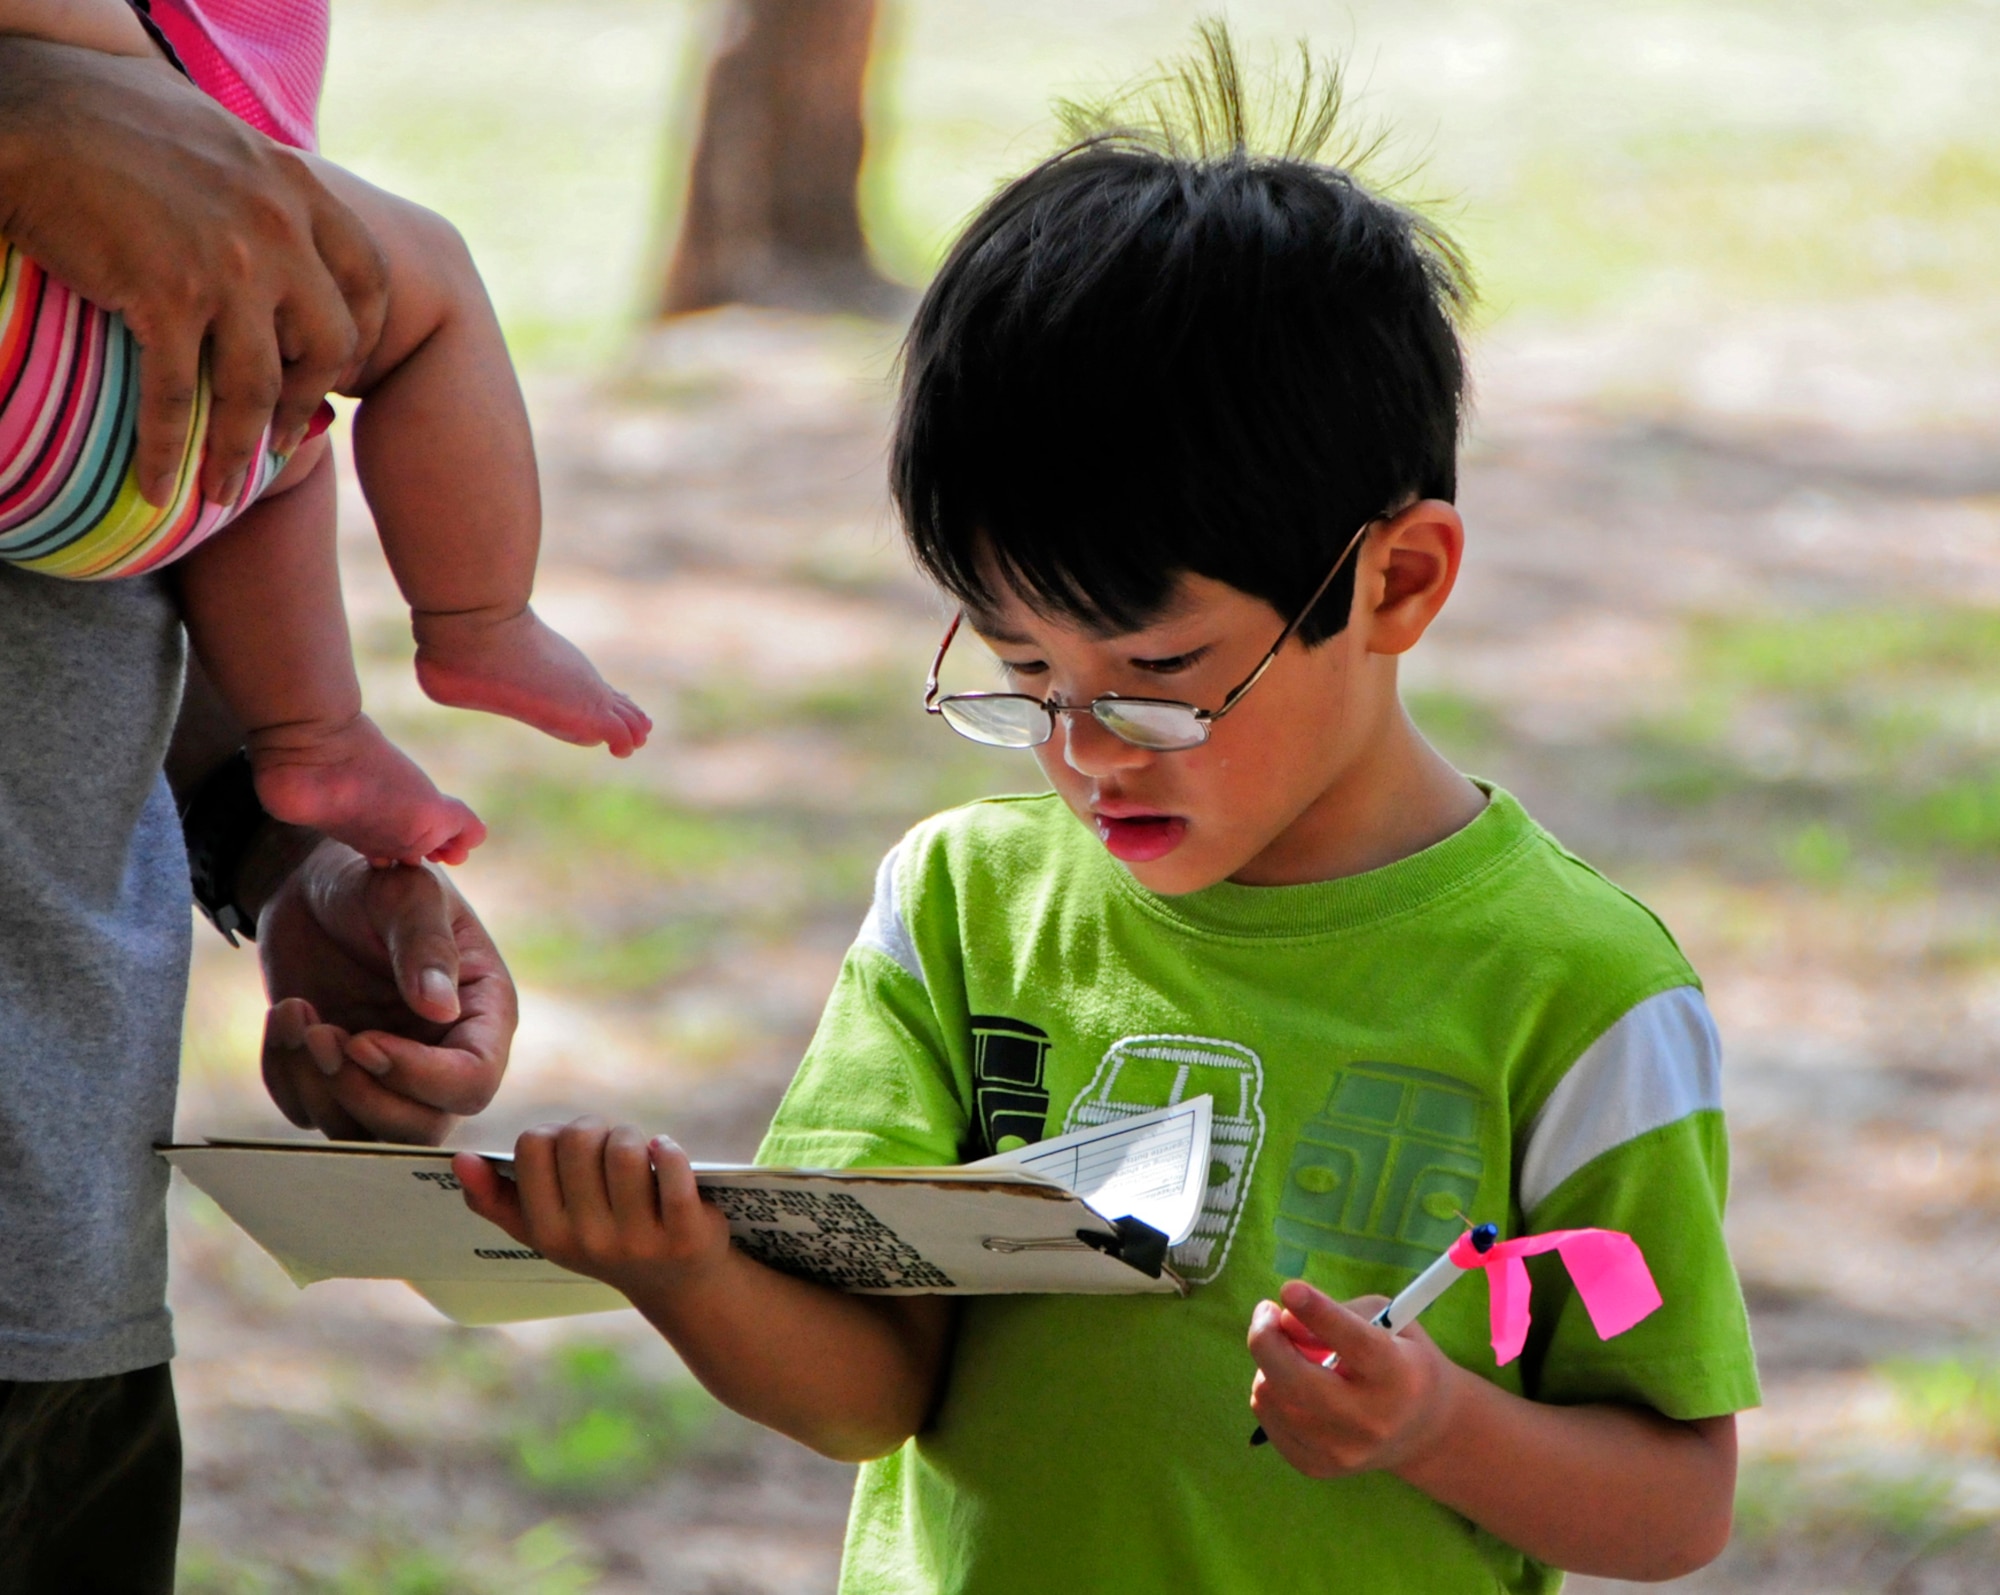 A young volunteer keeps track of the trash that his family collects during the Earth Day cleanup on Tarague Beach at Andersen Air Force Base, Guam, April 21, 2013. In celebration of Earth Day, the 36th Civil Engineer Squadron environmental flight facilitated a beach cleanup, displayed natural, cultural and historical exhibits, offered educational games and gave out prizes to promote environmental awareness. (U.S. Air Force photo by Airman 1st Class Marianique Santos/Released)